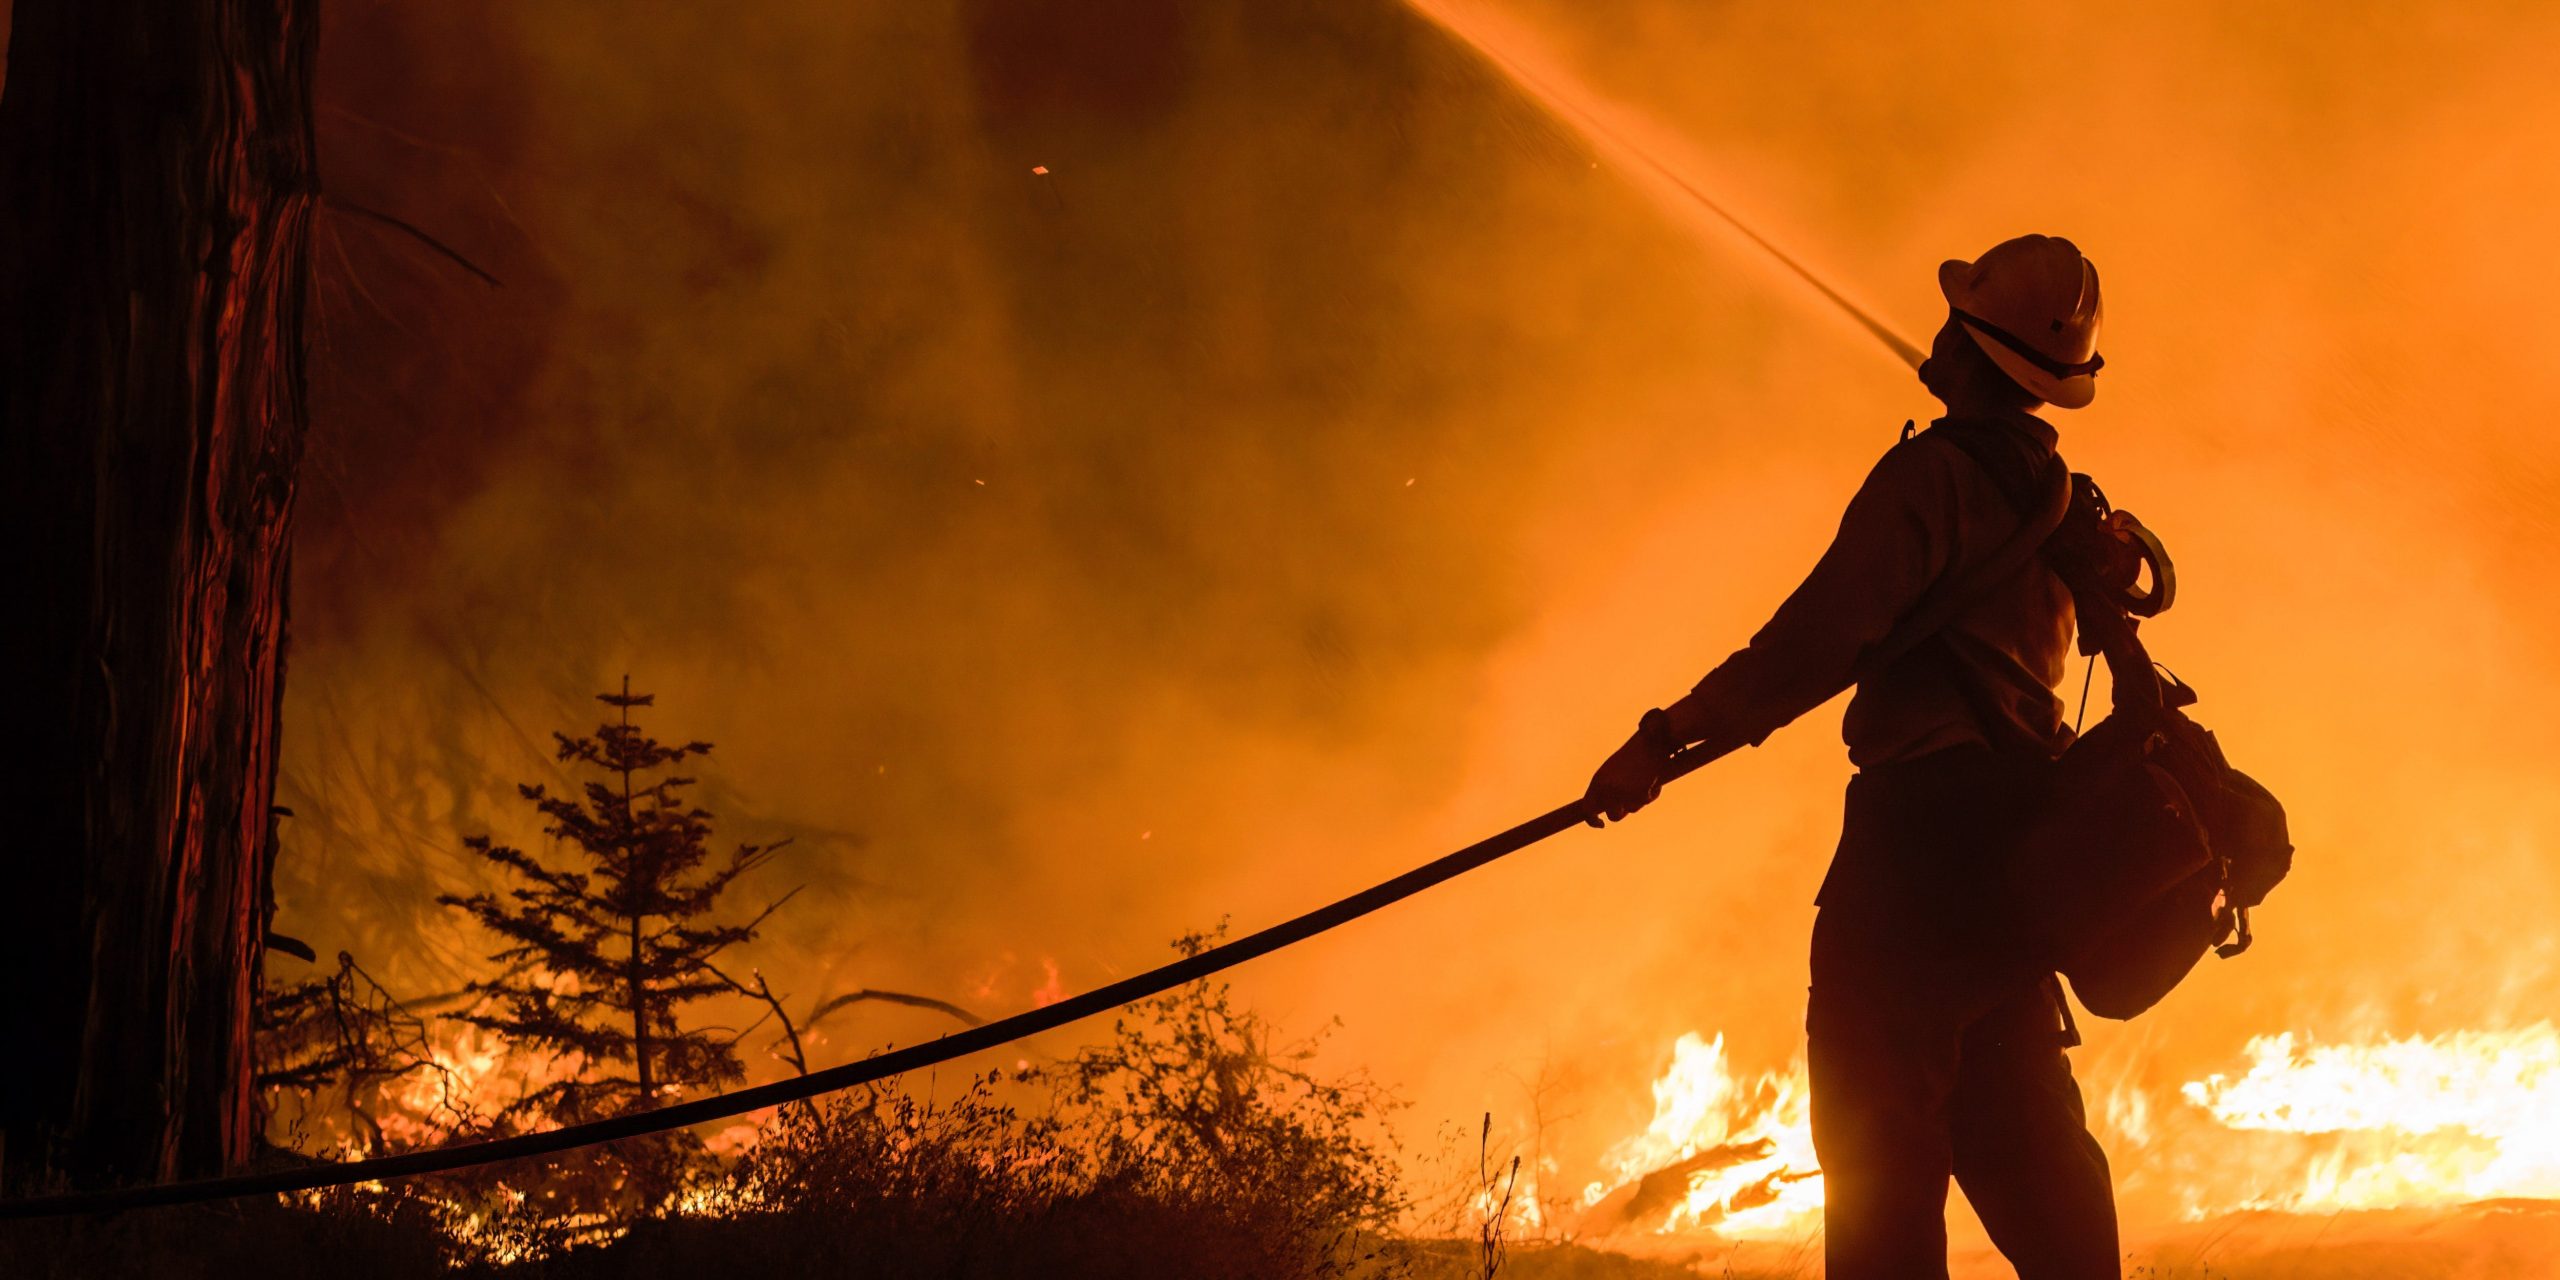 A firefighter sprays water on the trees. The Caldor fire has grown to over 130,000 acres and threatens to grow to the Tahoe basin. These images where taken at a backfire set by crews in an effort to gain control on the Caldor fire. Cause still unknown at this time.